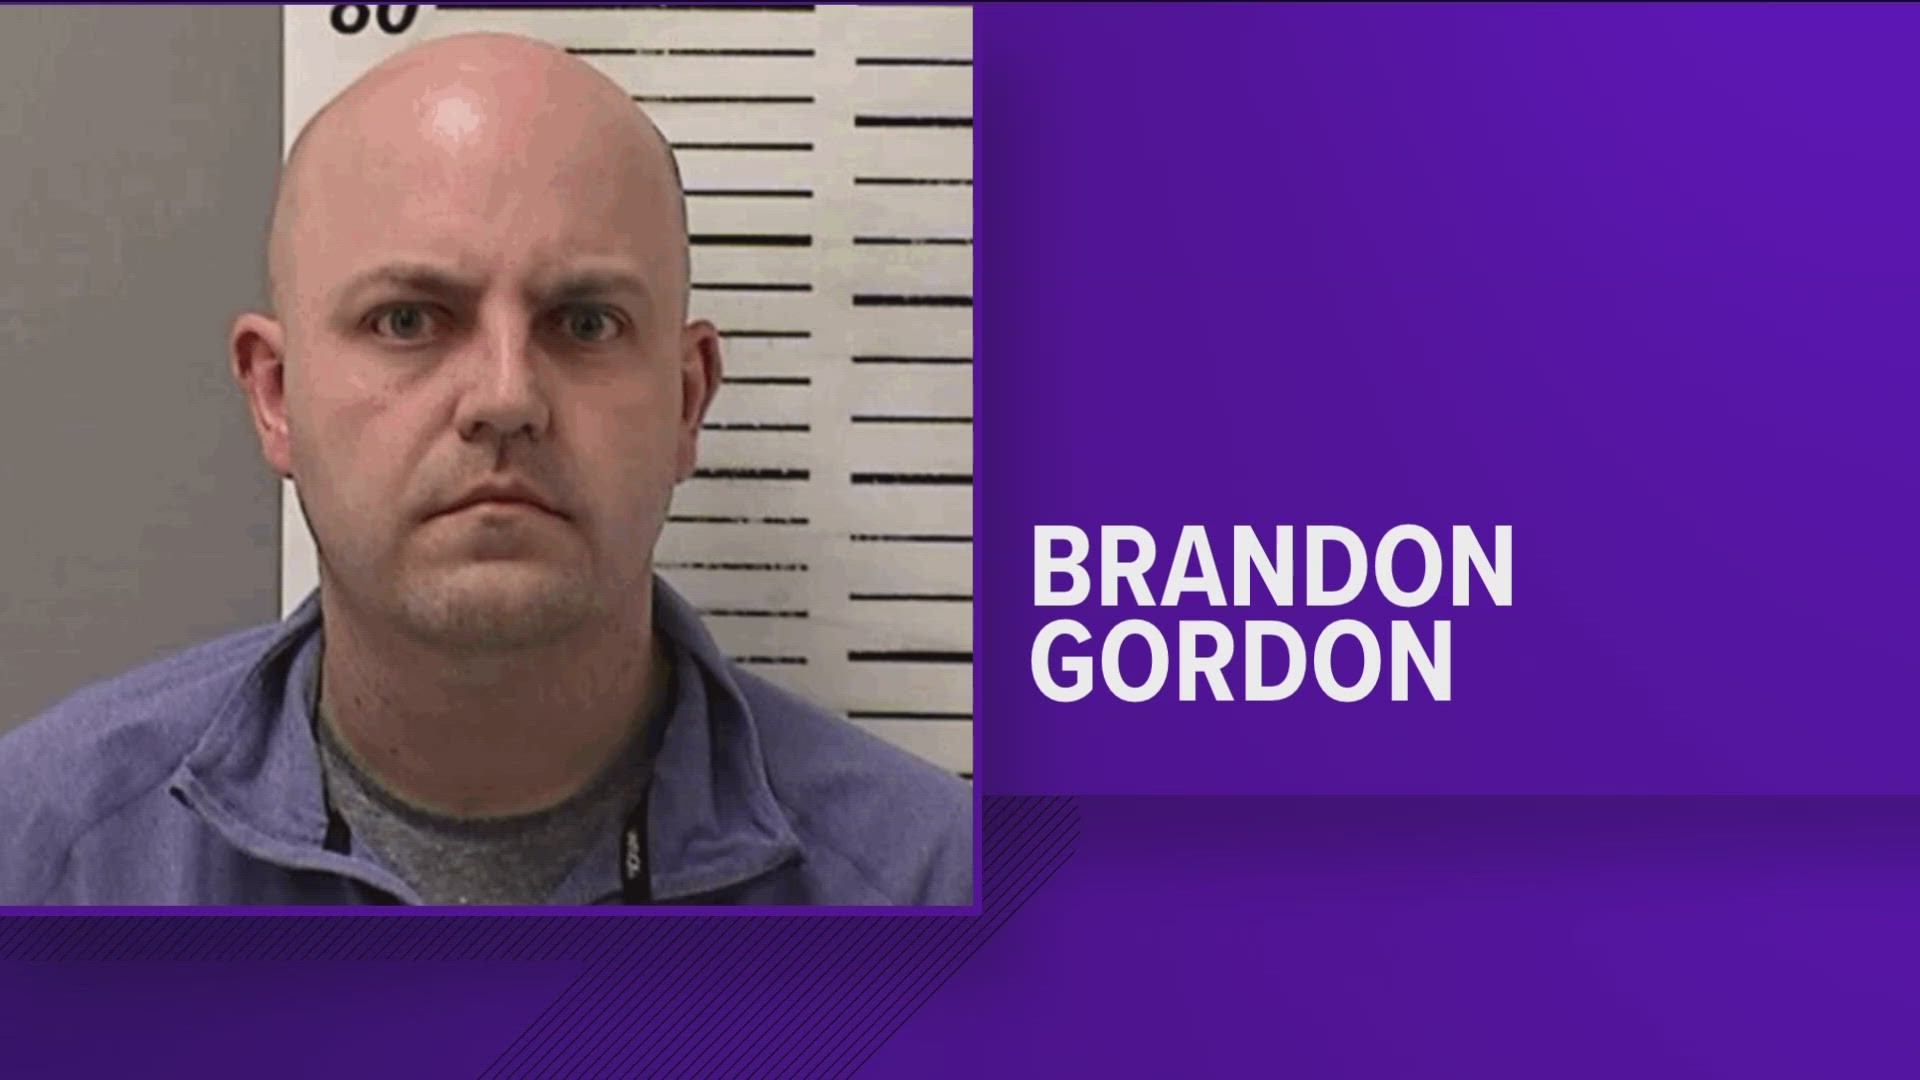 Brandon Gordon is charged with using electronic telecommunication to entice and solicit minors. It is not believed the crimes involve northwest Ohio children.